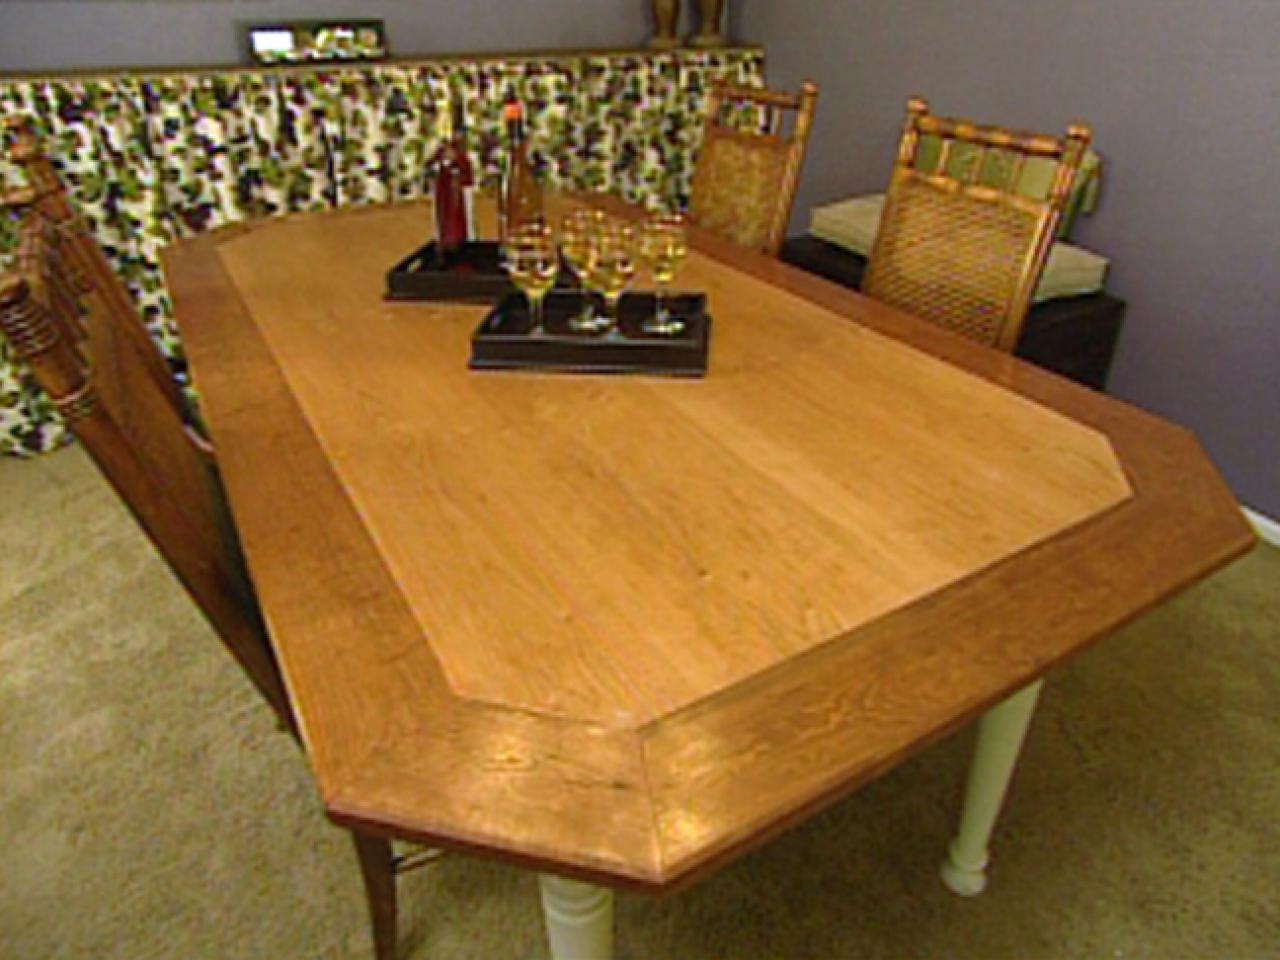 How To Build An Octagon Dining Table, Octagon Dining Room Table Set